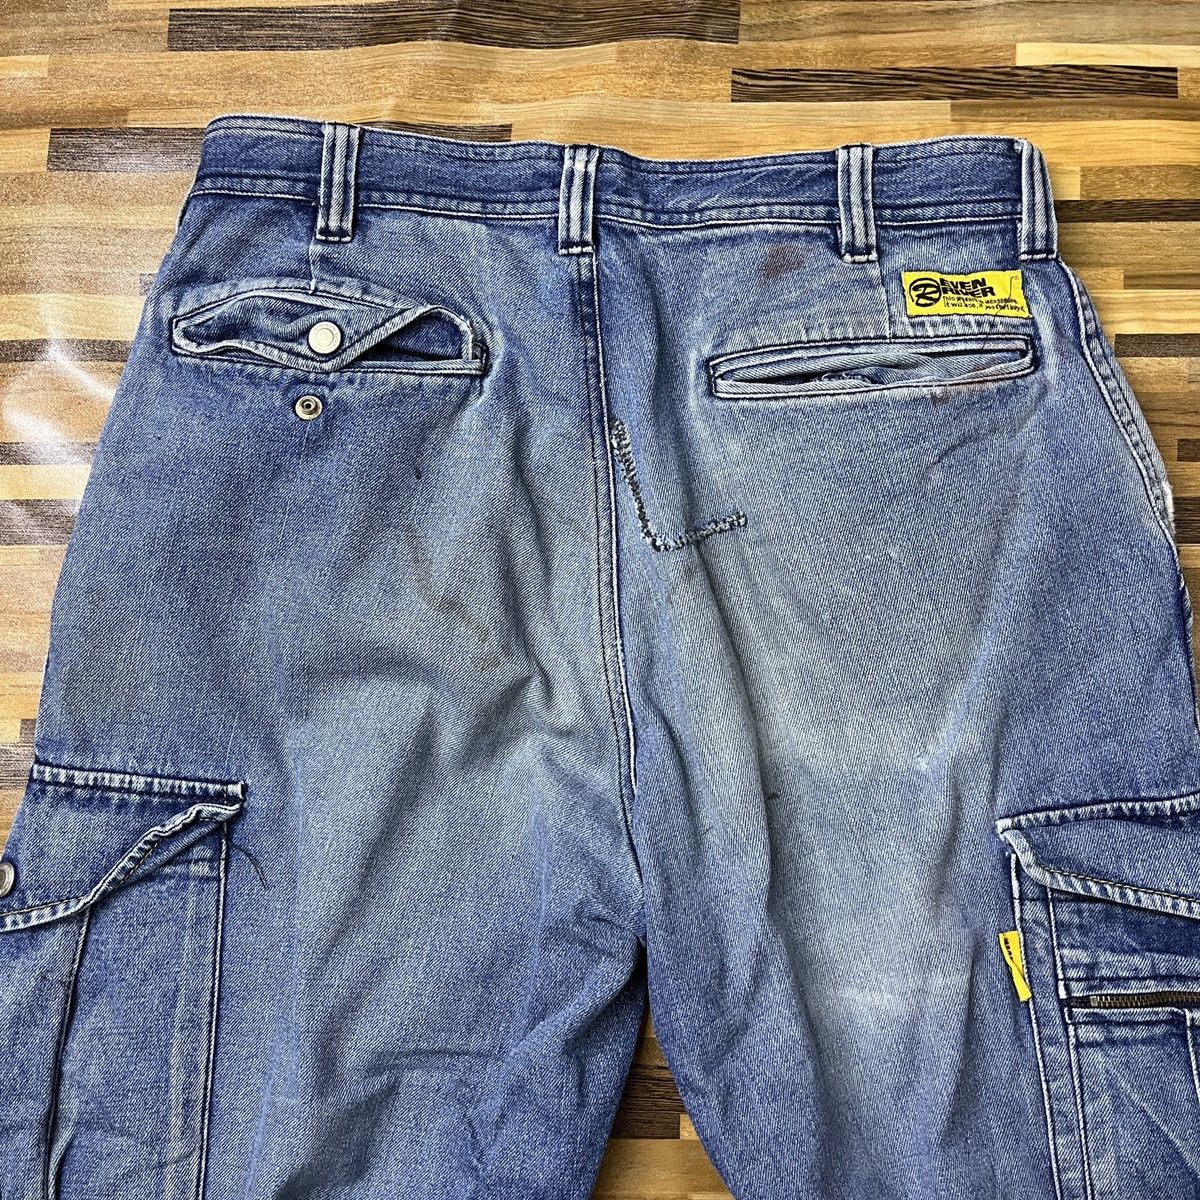 Distressed Denim - Worn Even River Japanese Cargo Denim Ripped Baggy Style - 14